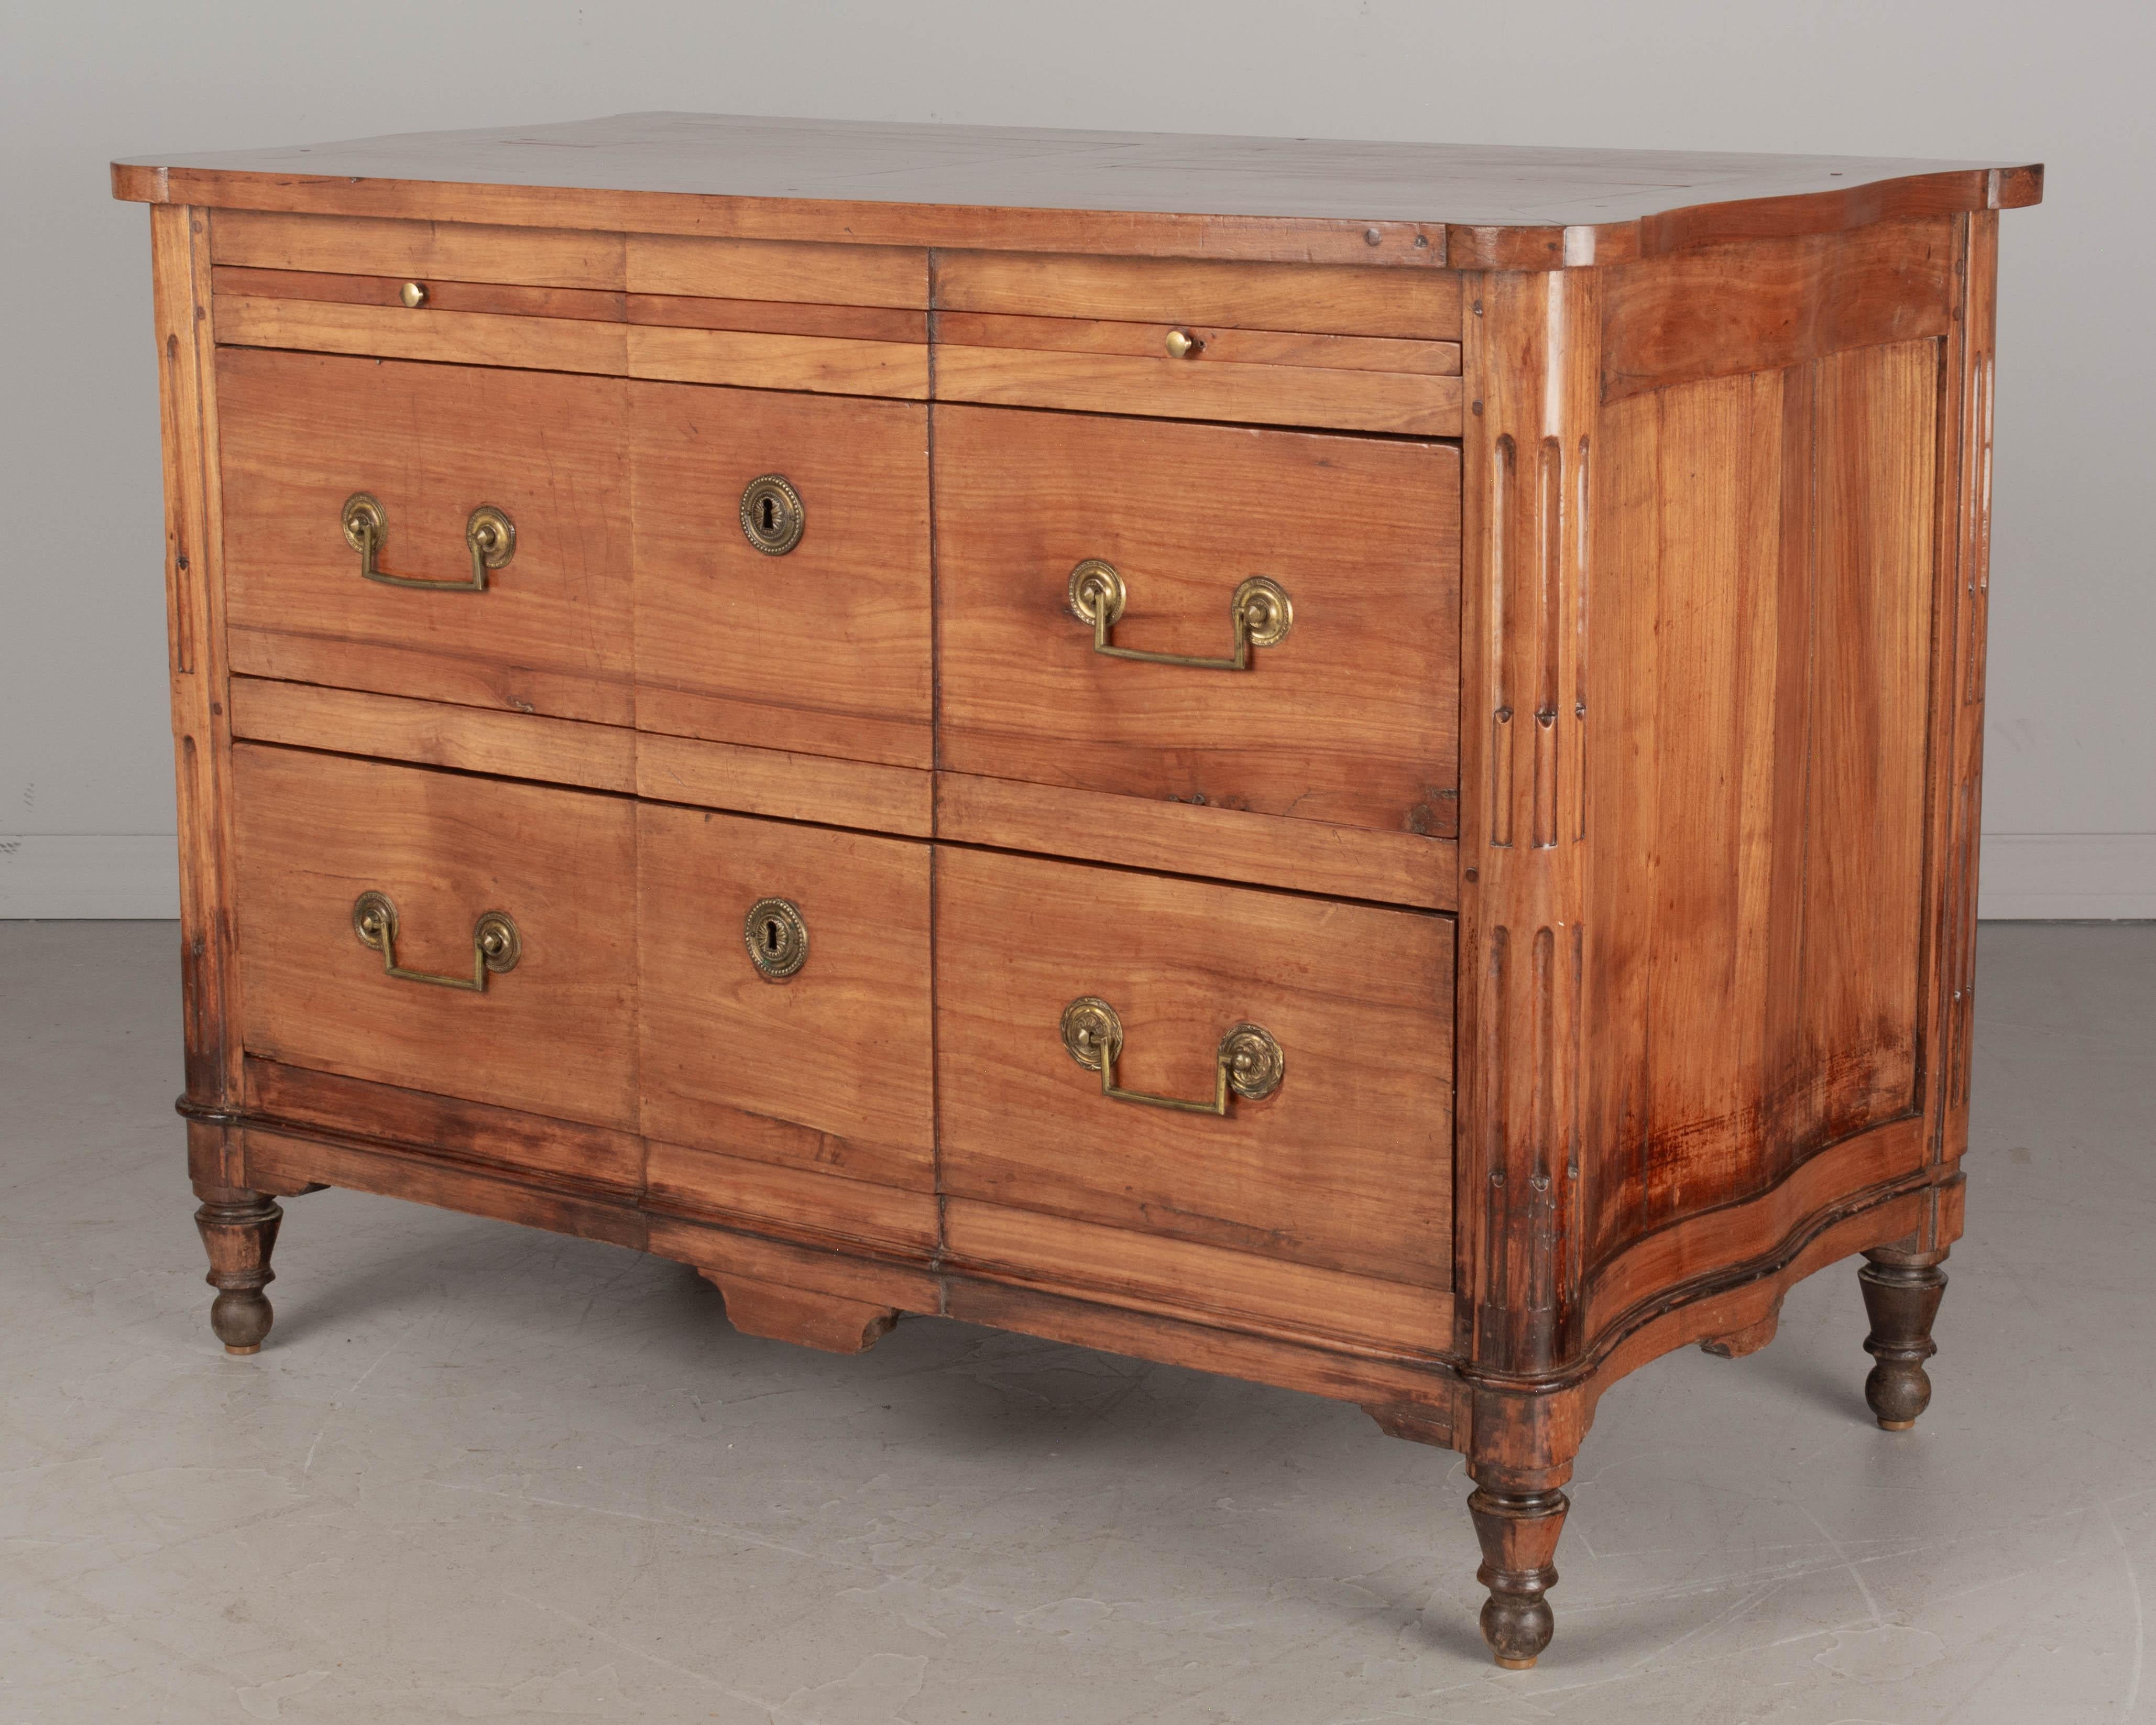 19th Century French Directoire Commode or Chest of Drawers In Good Condition For Sale In Winter Park, FL